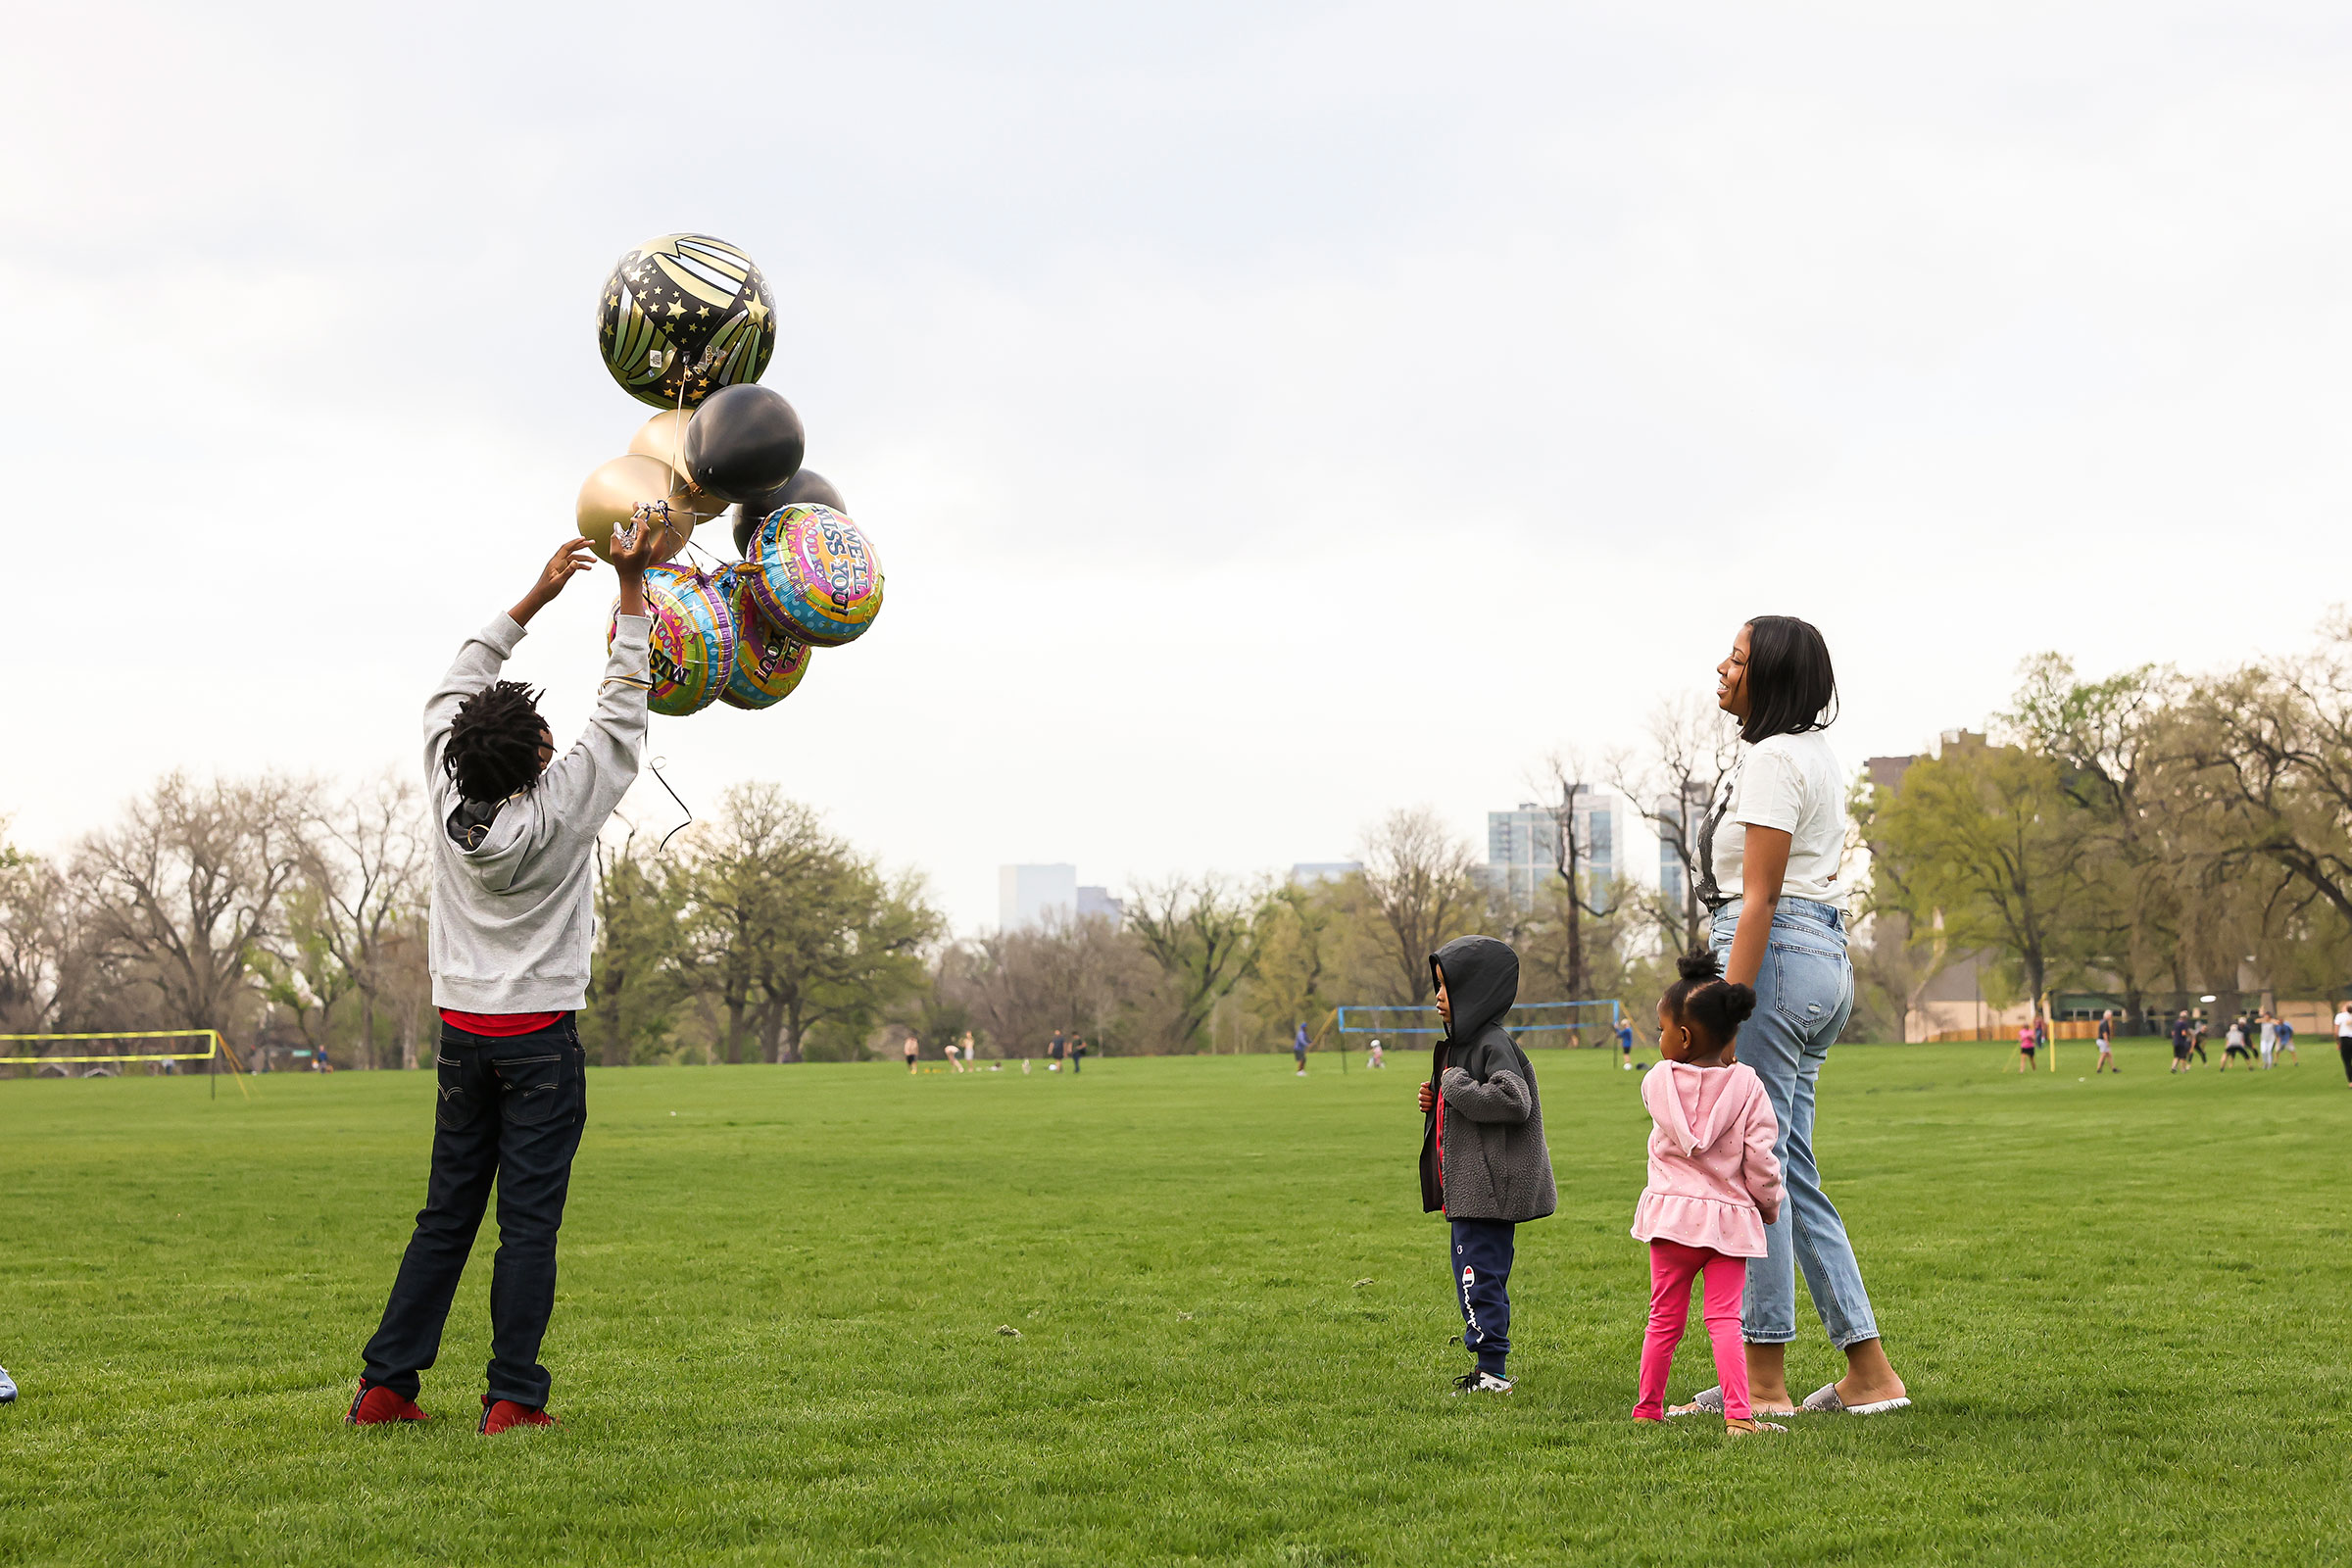 Nehemiah prepares to release balloons in commemoration of his father while his mother Ashley, his 4-year-old bother, Prince, and 3-year-old sister, Zyla, watch nearby (Kevin Mohatt for TIME)